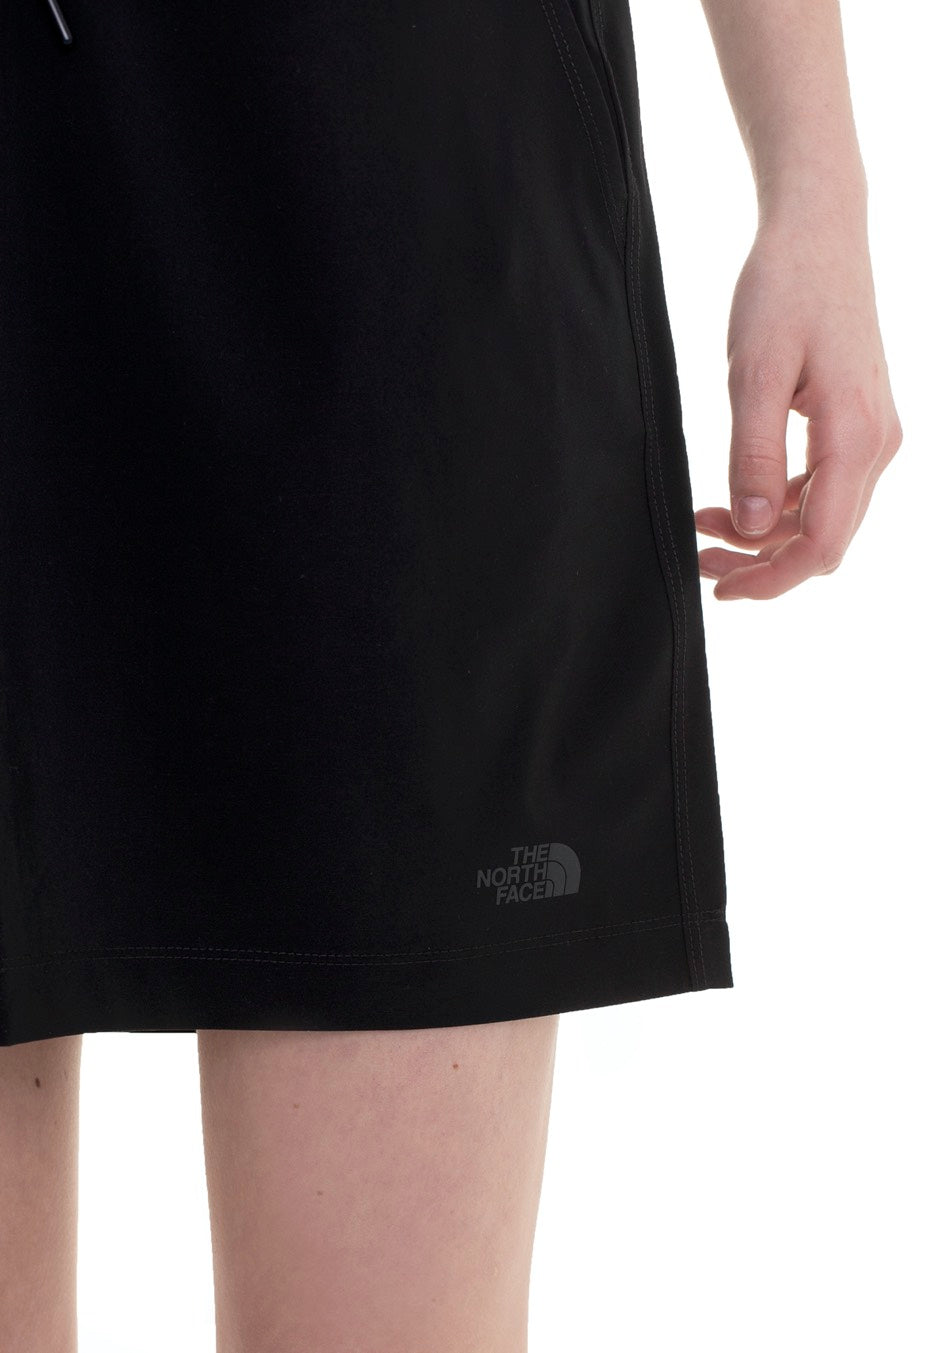 The North Face - Never Stop Wearing Black - Skirt